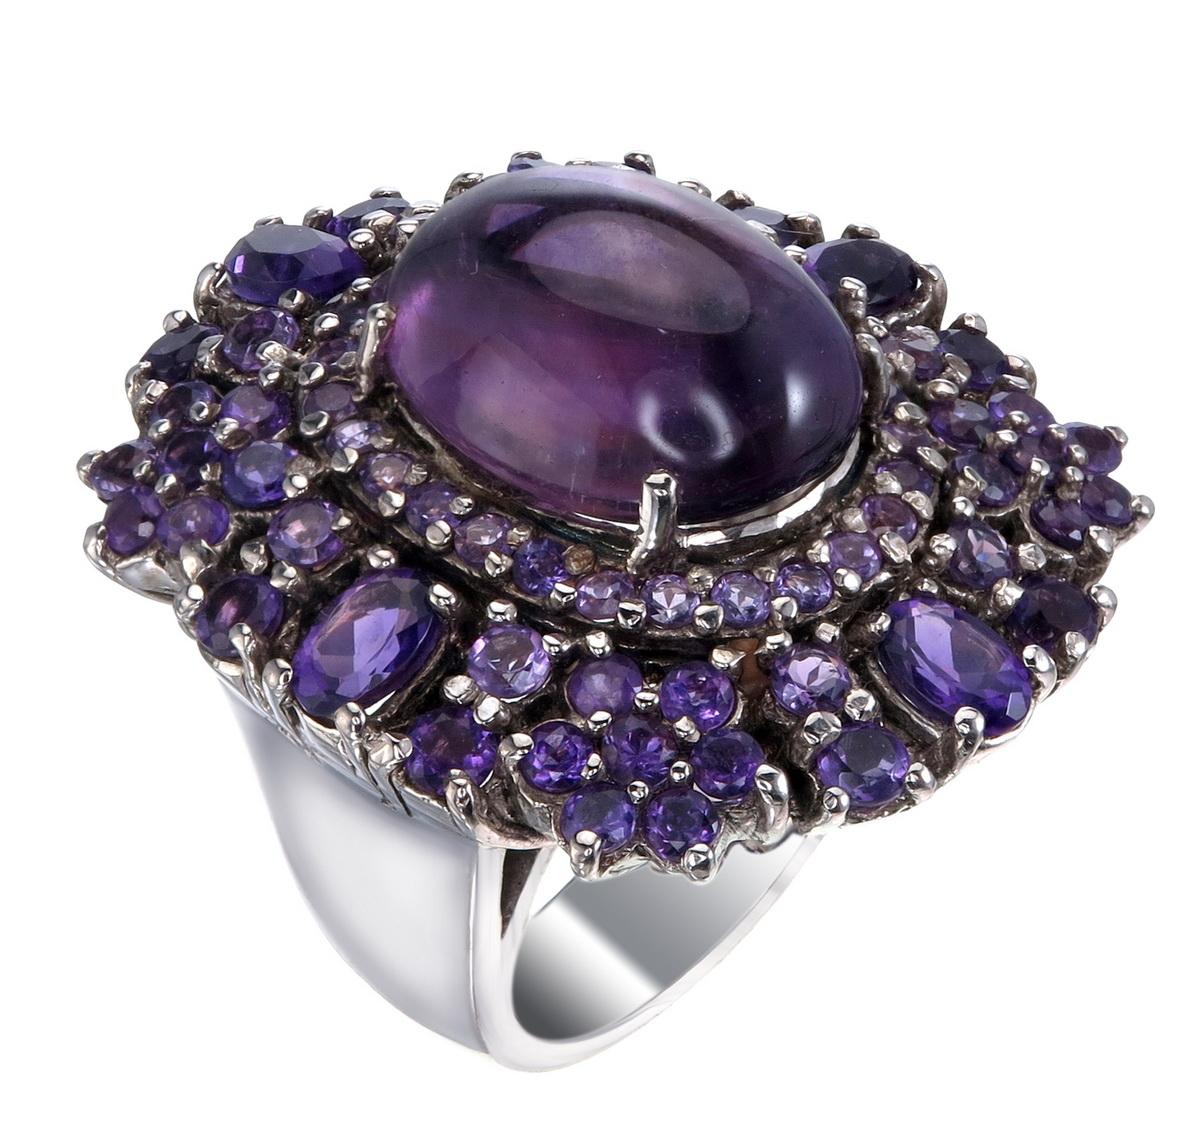 Ginormous Amethyst Cluster Cocktail Ring forged in 925 Sterling Silver.
The massive amethyst cocktail ring is a bold and striking piece of jewelry that exudes luxury and style.
Around the large cabochon sits 74 smaller amethysts in a floral